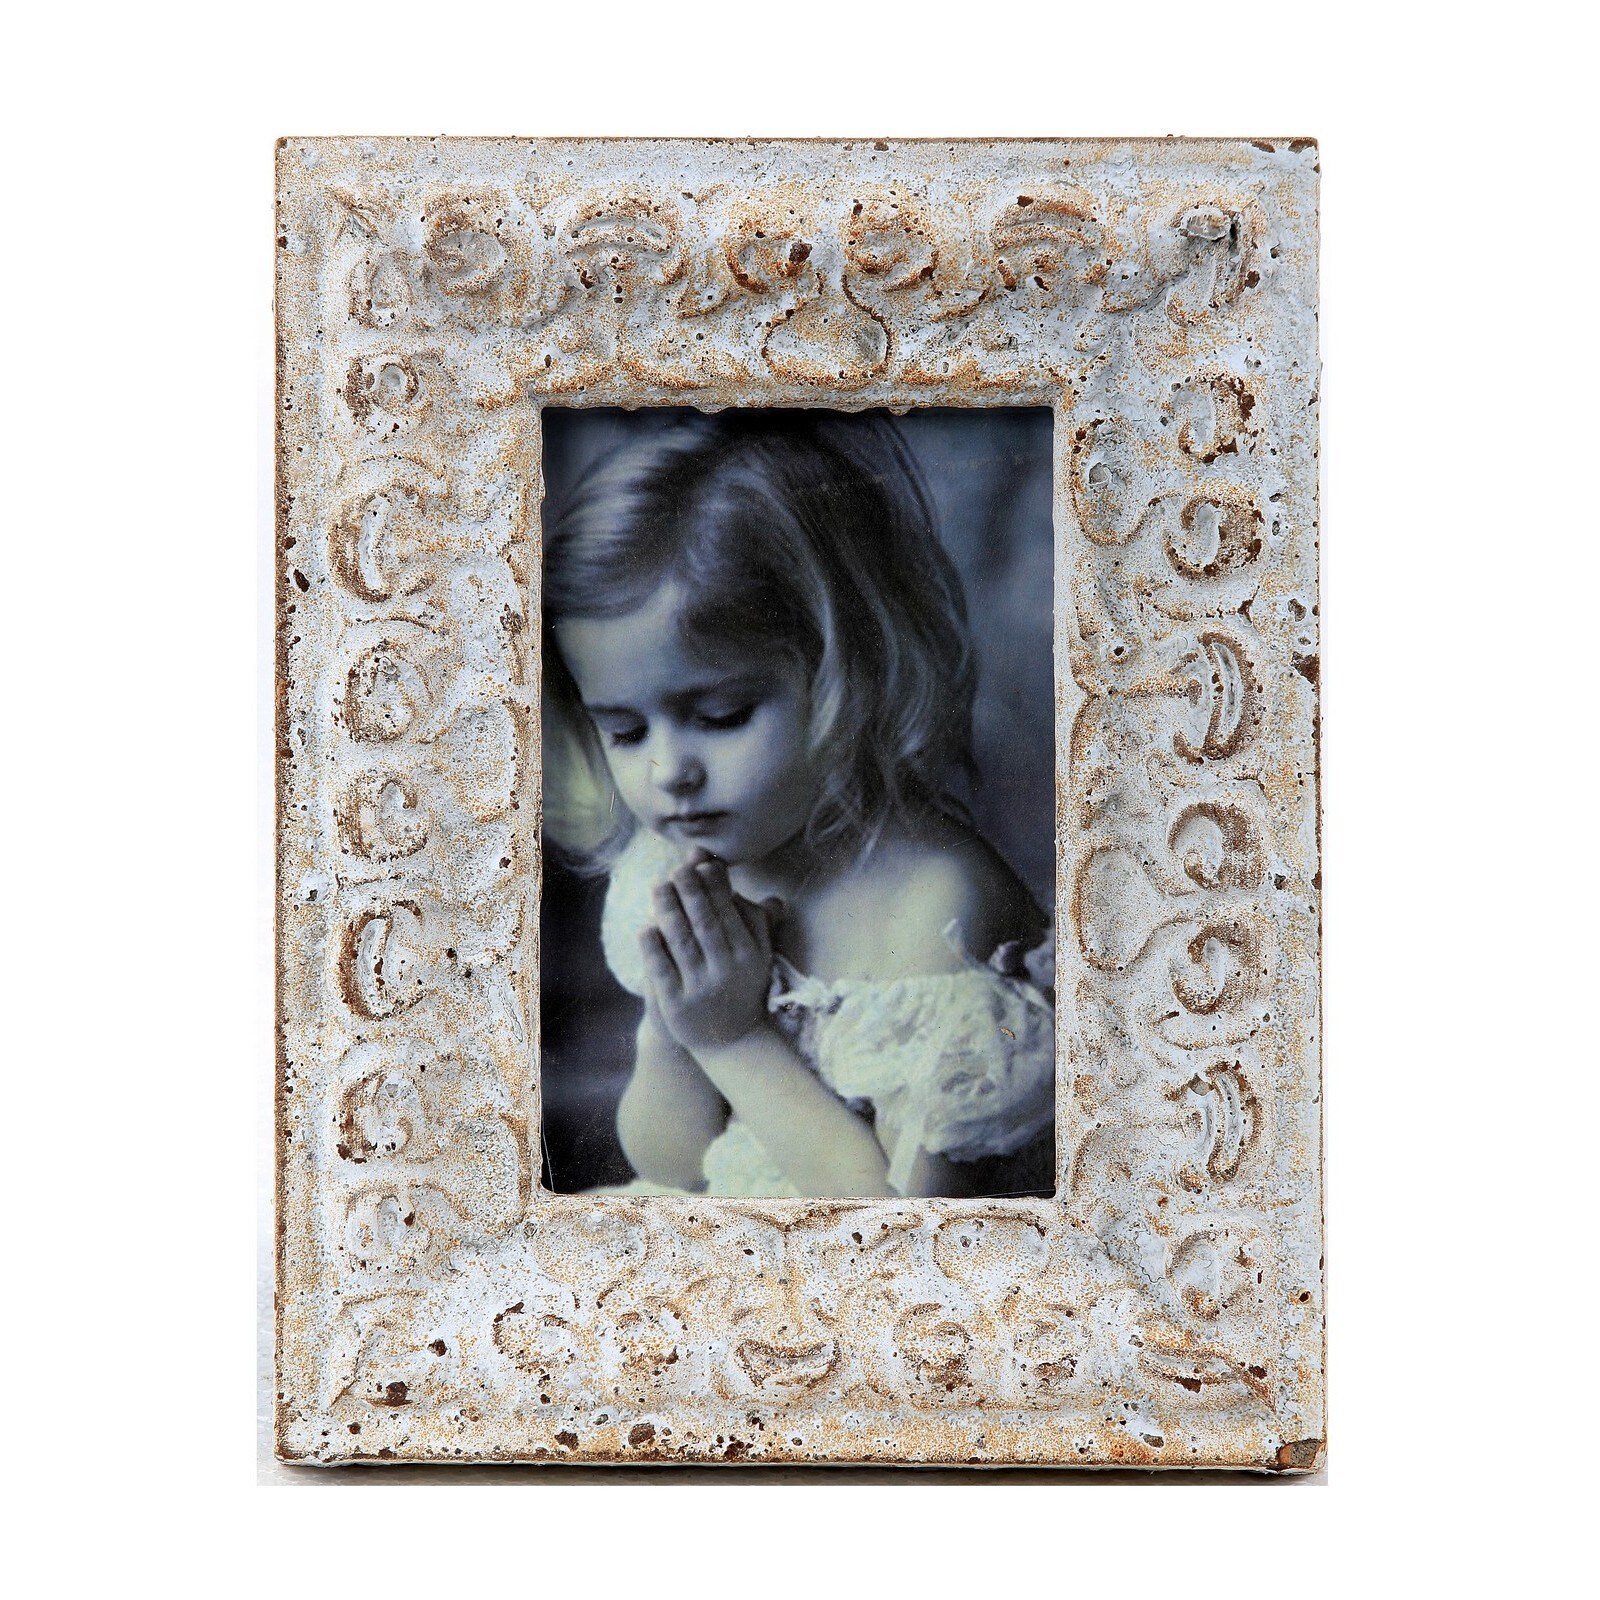 Privilege Distressed White Ceramic Photo Frame (Distressed whiteMaterials CeramicQuantity One (1) frameSetting IndoorDimensions 9 inches high x 7 inches wide x 1.5 inches deep )